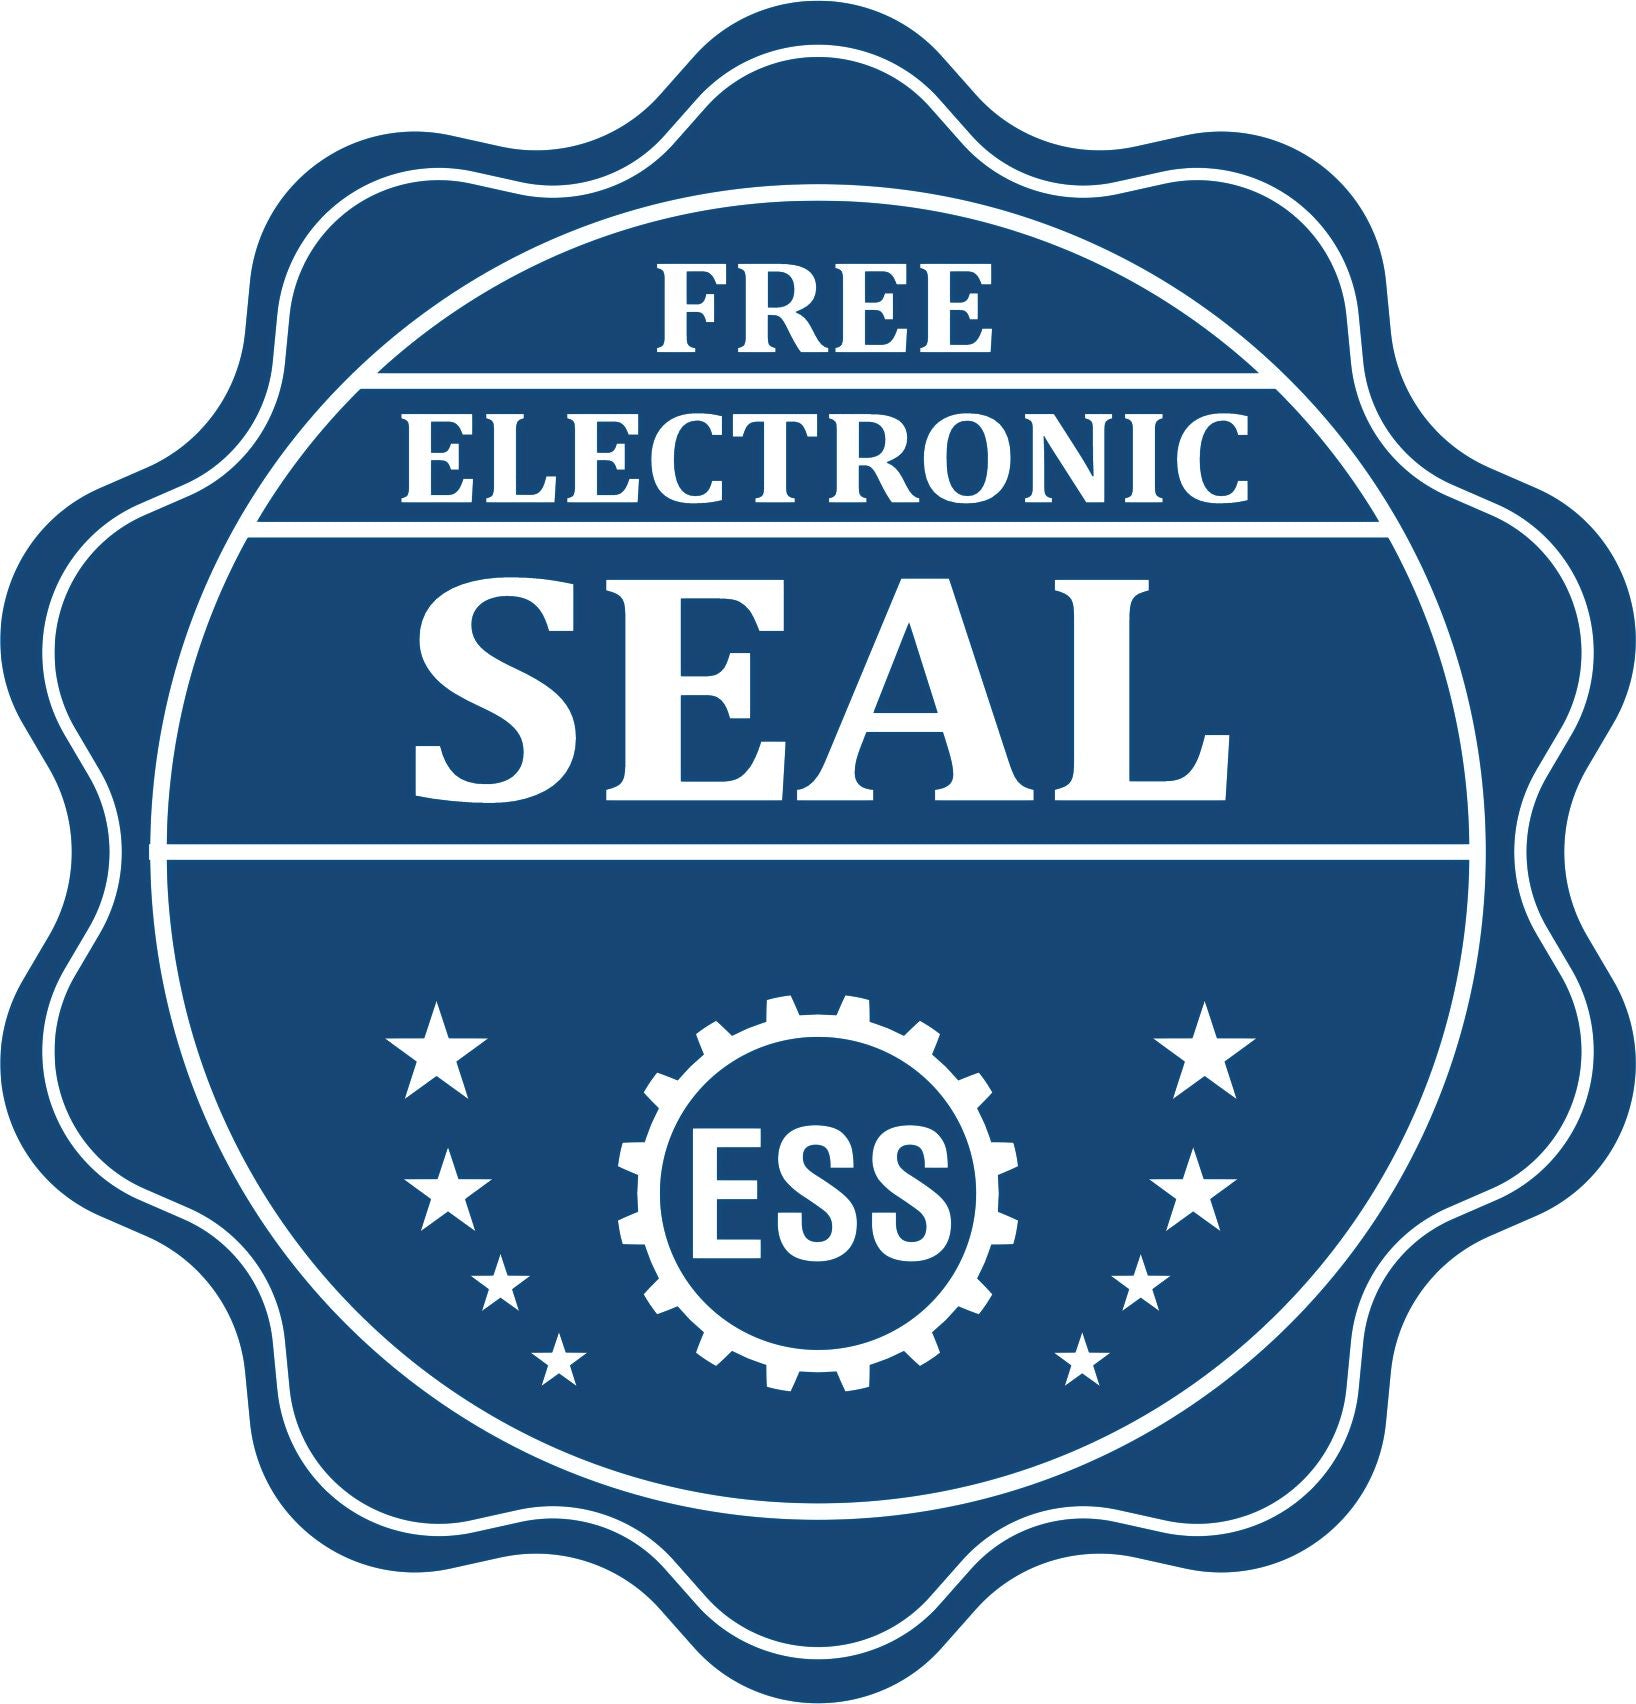 A badge showing a free electronic seal for the Hybrid North Carolina Landscape Architect Seal with stars and the ESS gear on the emblem.